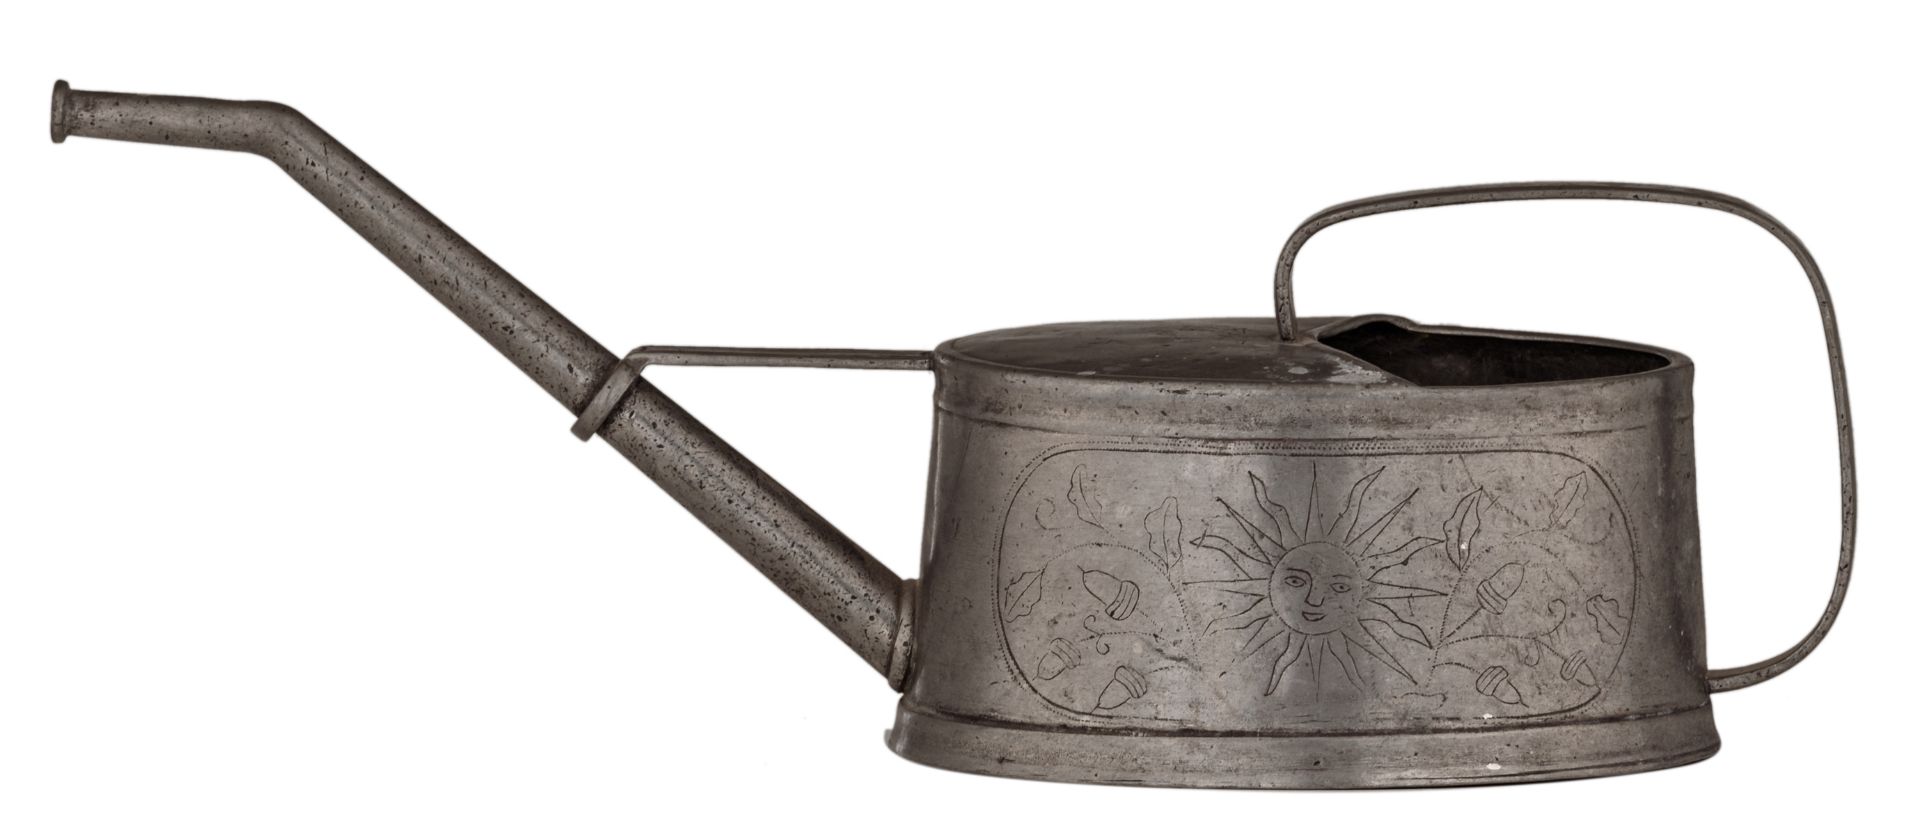 A 1793 dated, most probably Dutch, pewter watering can with engraved decoration, H 15 - W 40 D 13